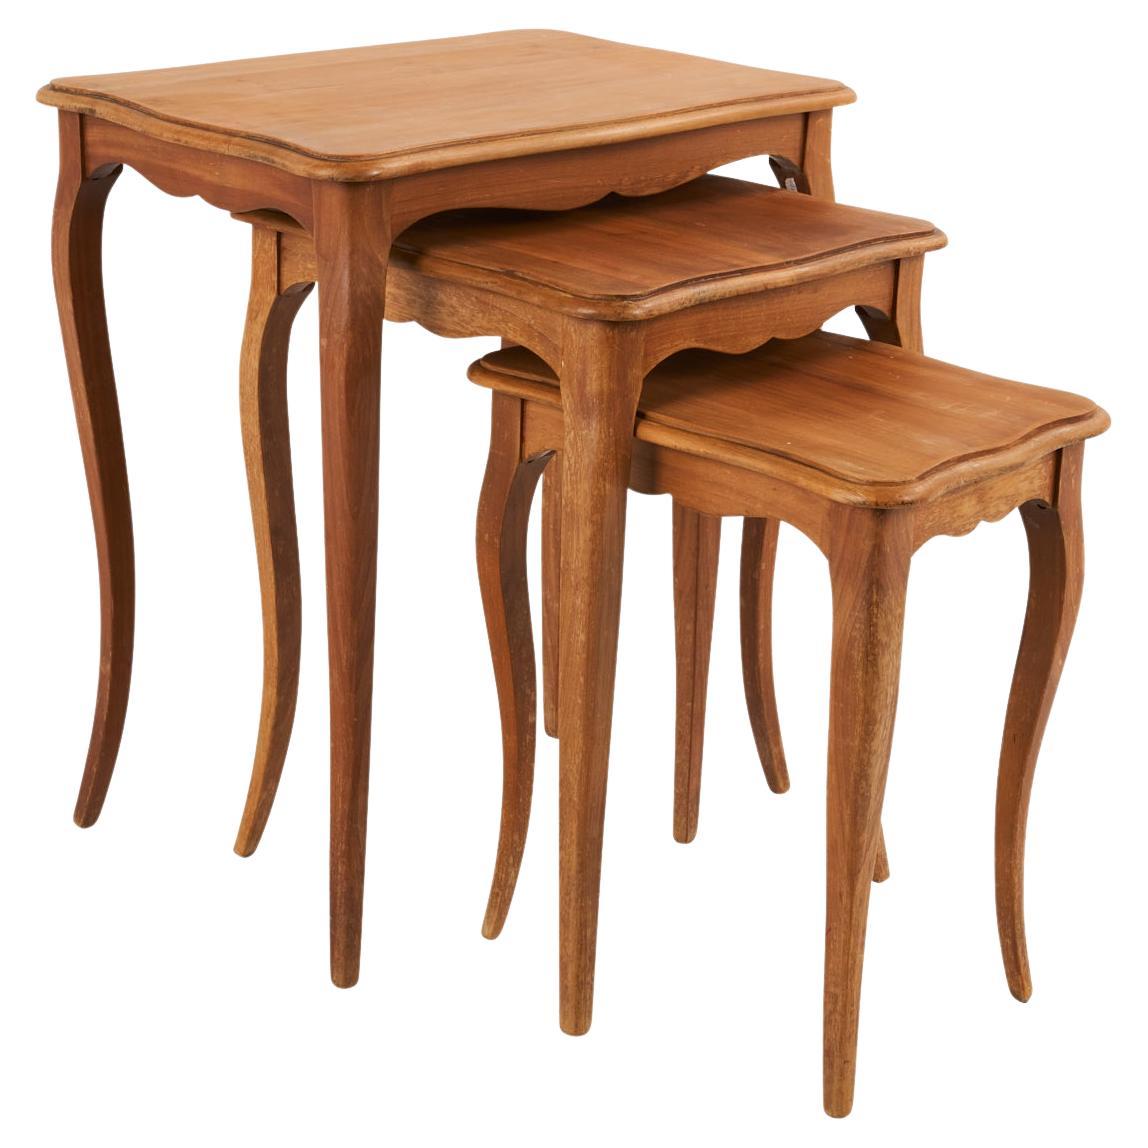 Set of 3 Wood Nesting Tables with Cabriole Leg, France